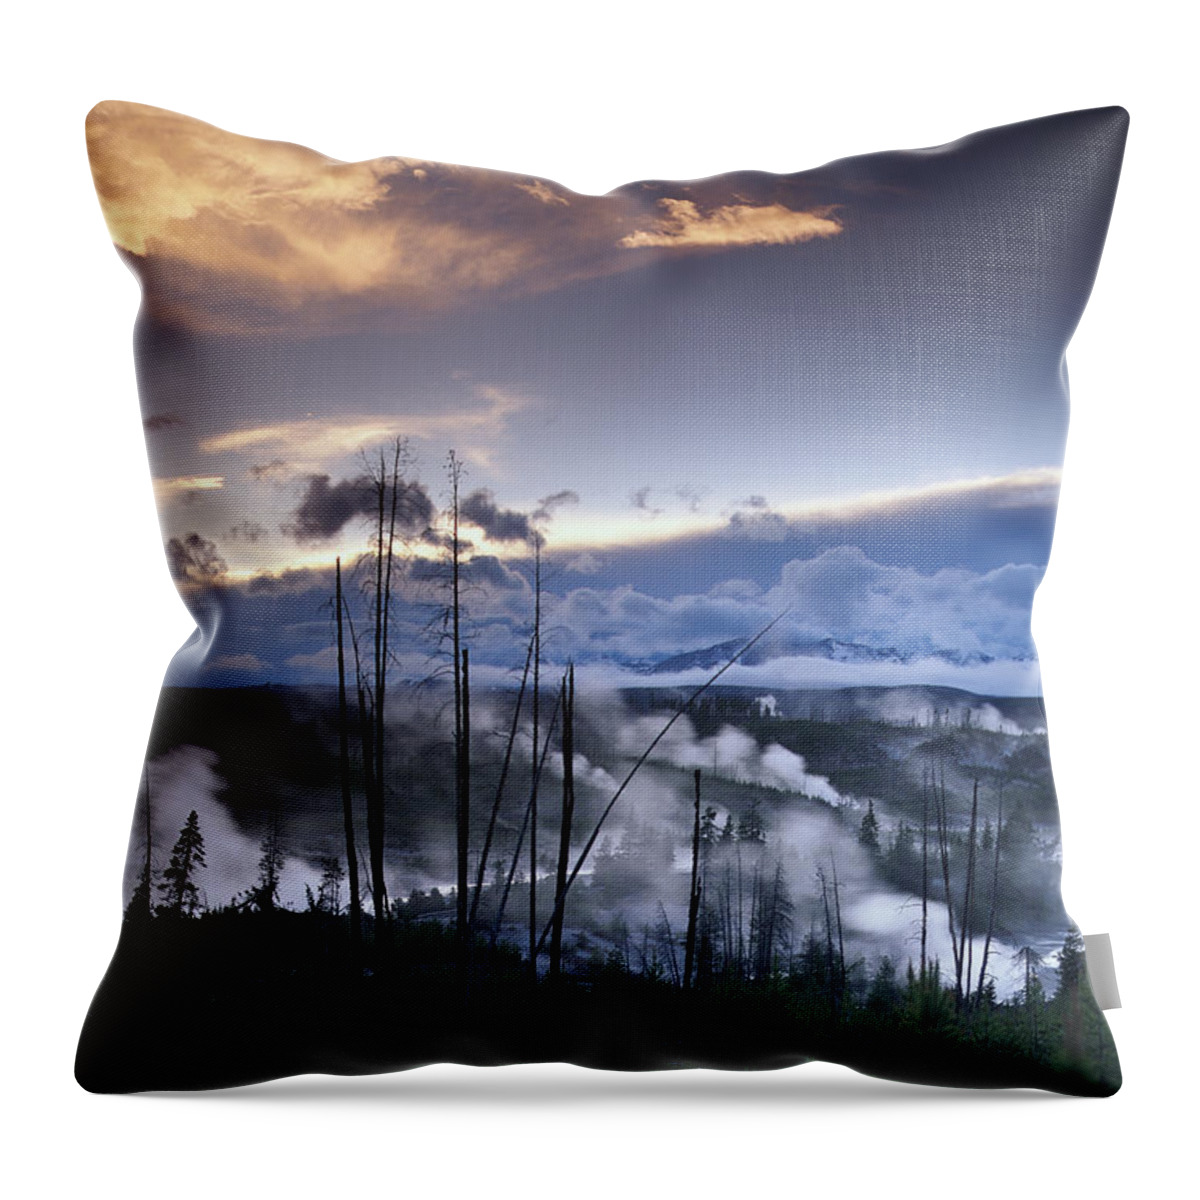 00173508 Throw Pillow featuring the photograph Norris Geyser Basin With Steam Plumes by Tim Fitzharris